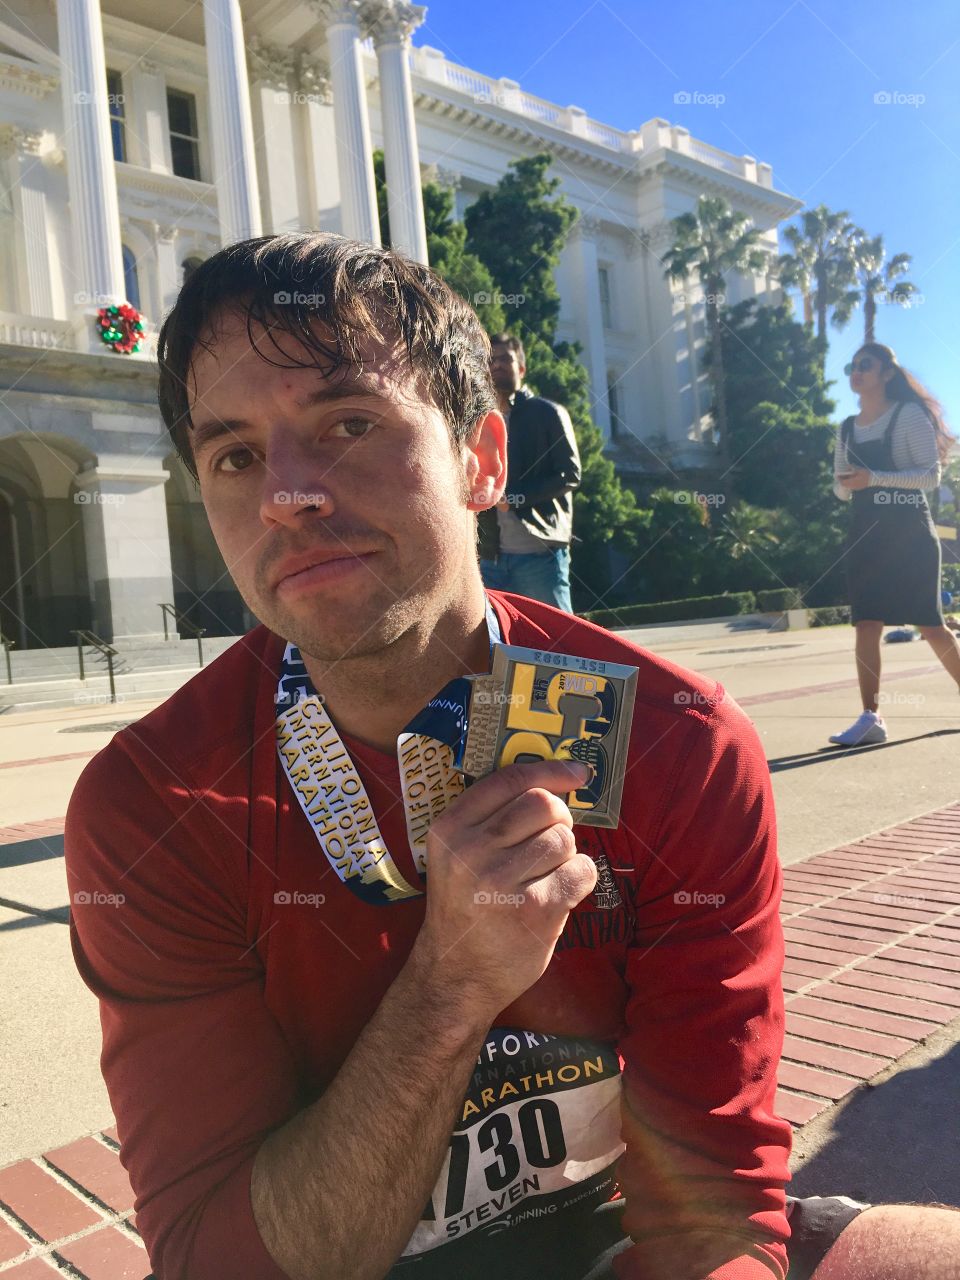 Tired man after running a marathon with his medal